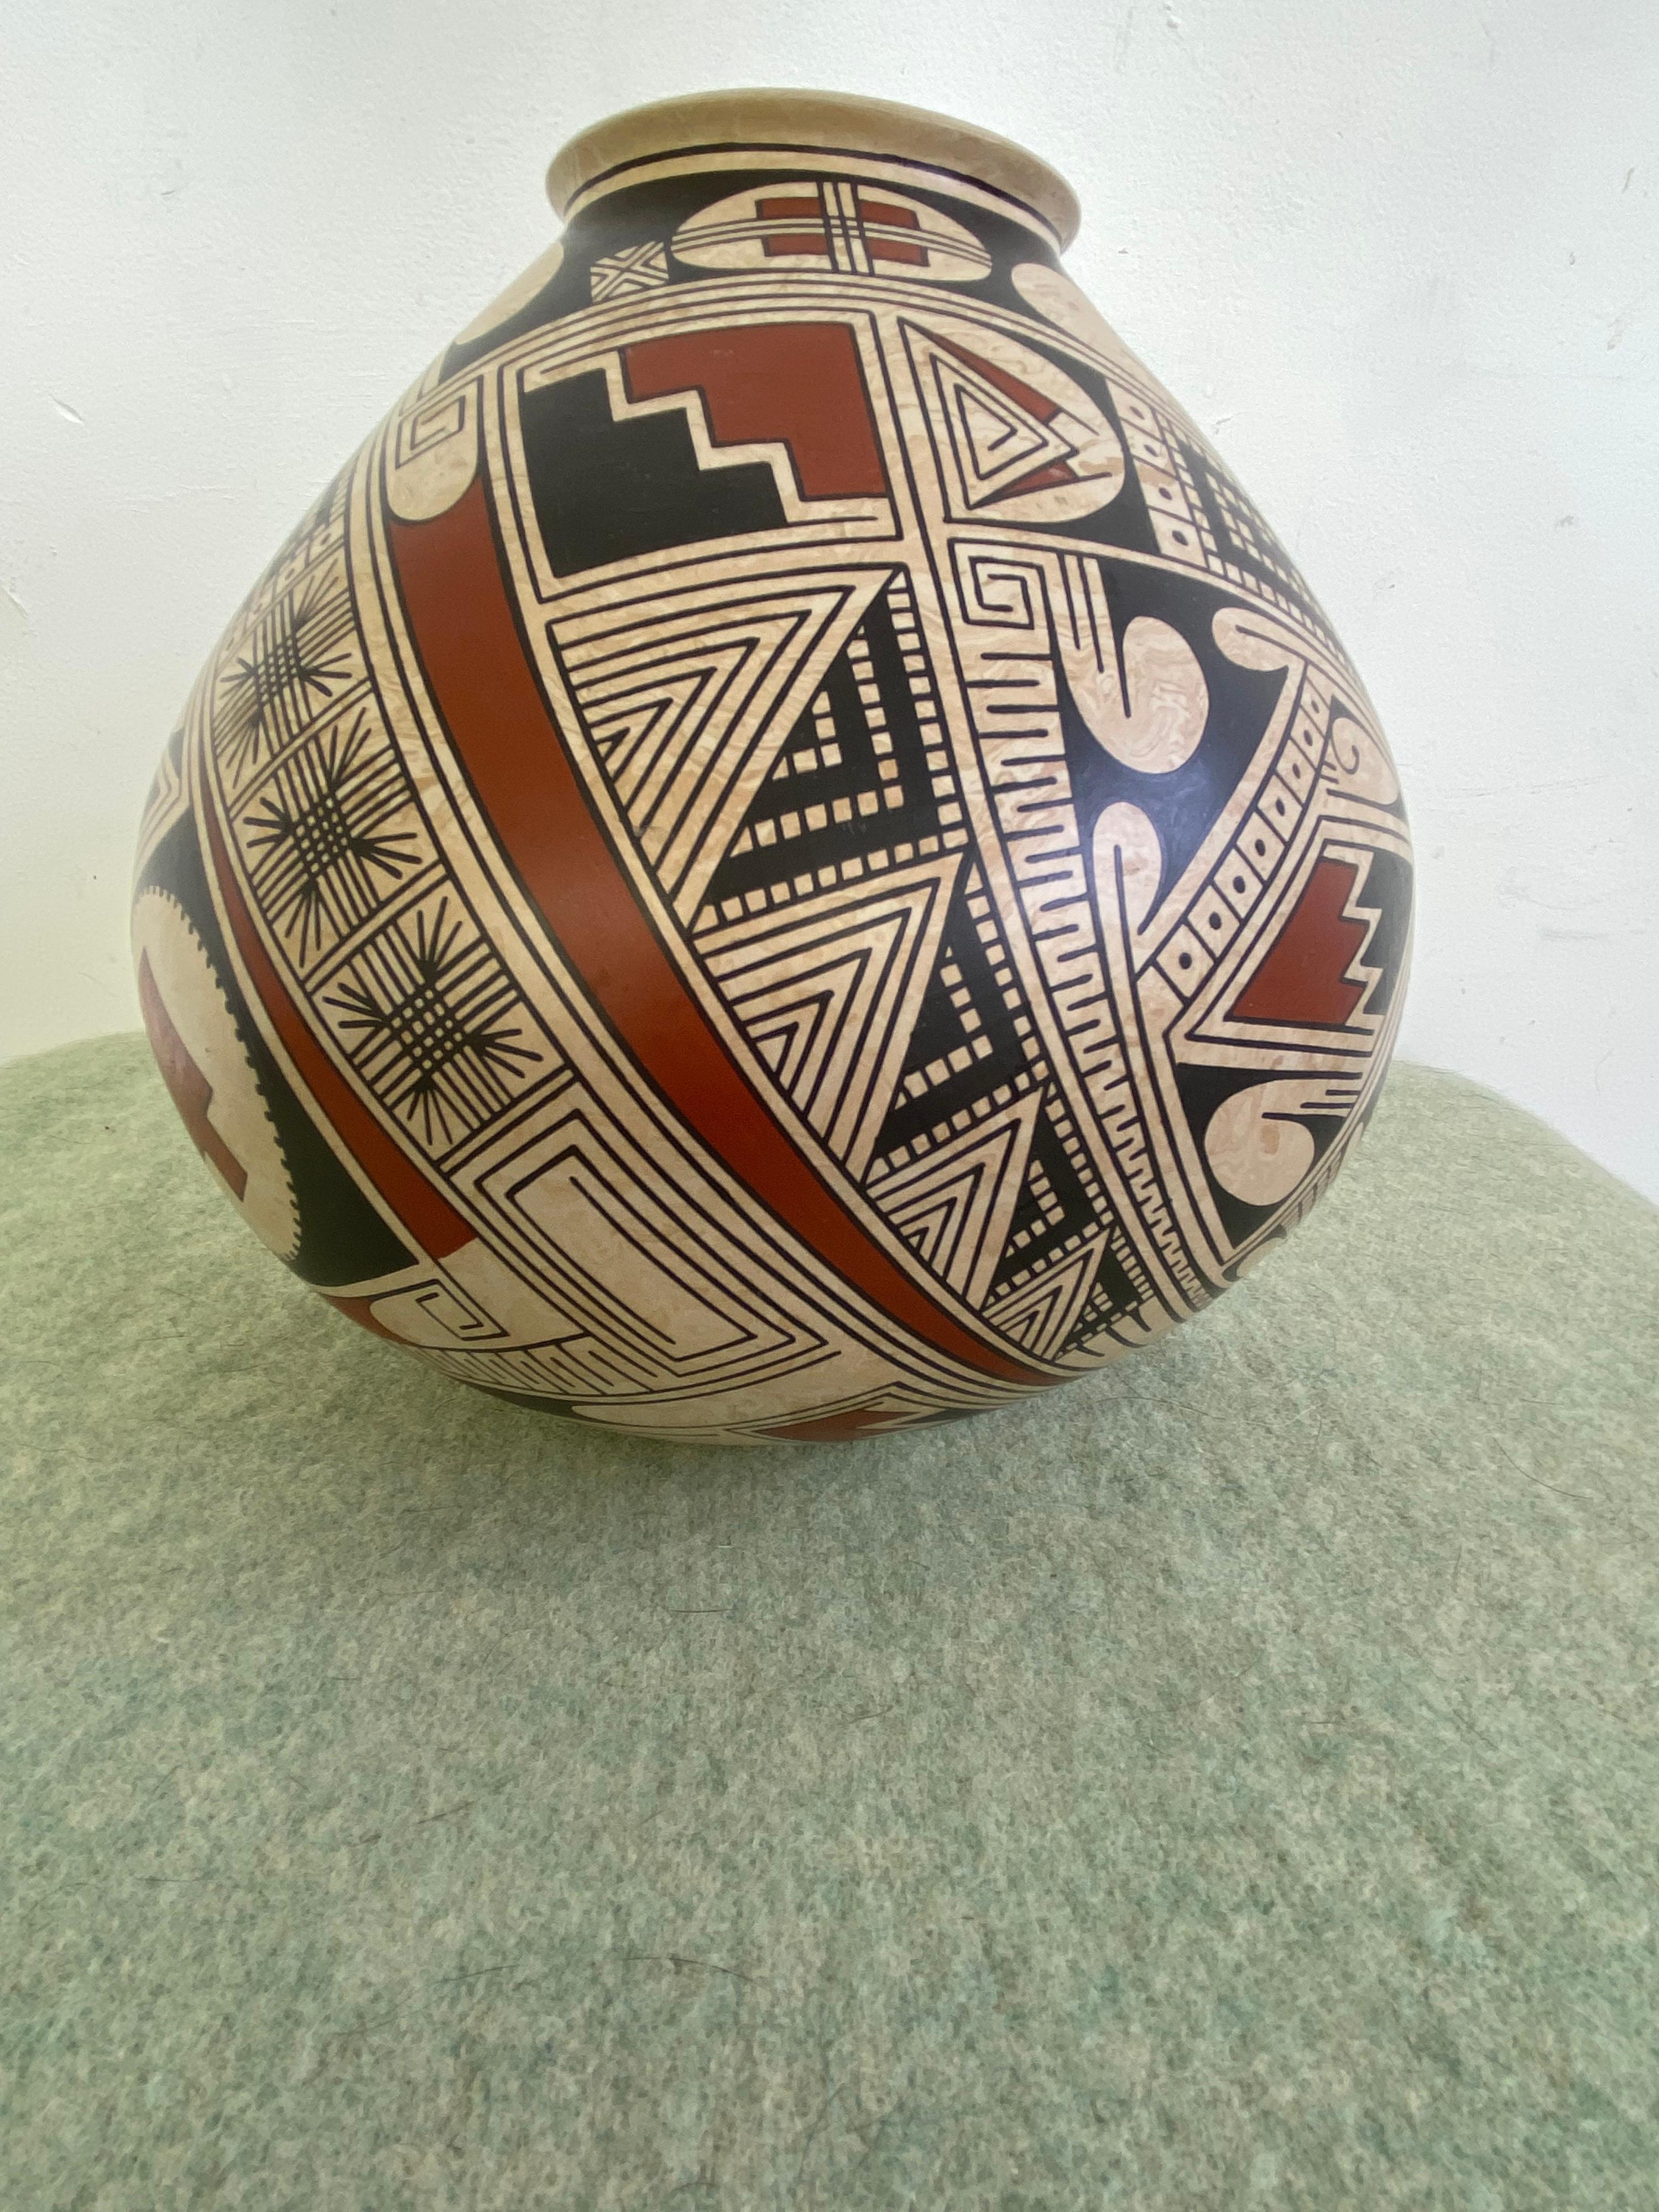 Maria Ortiz pottery (Mexico, Casa Grande). Bought in 1994 from Lanning/Sapp Gallery, Sedona. Designed and made by potter Pilo Mora. Hand-Coiled Low fire Clay. Nice large example of this pottery, in very nice shape! Pilo Mora was born in 1961 and is